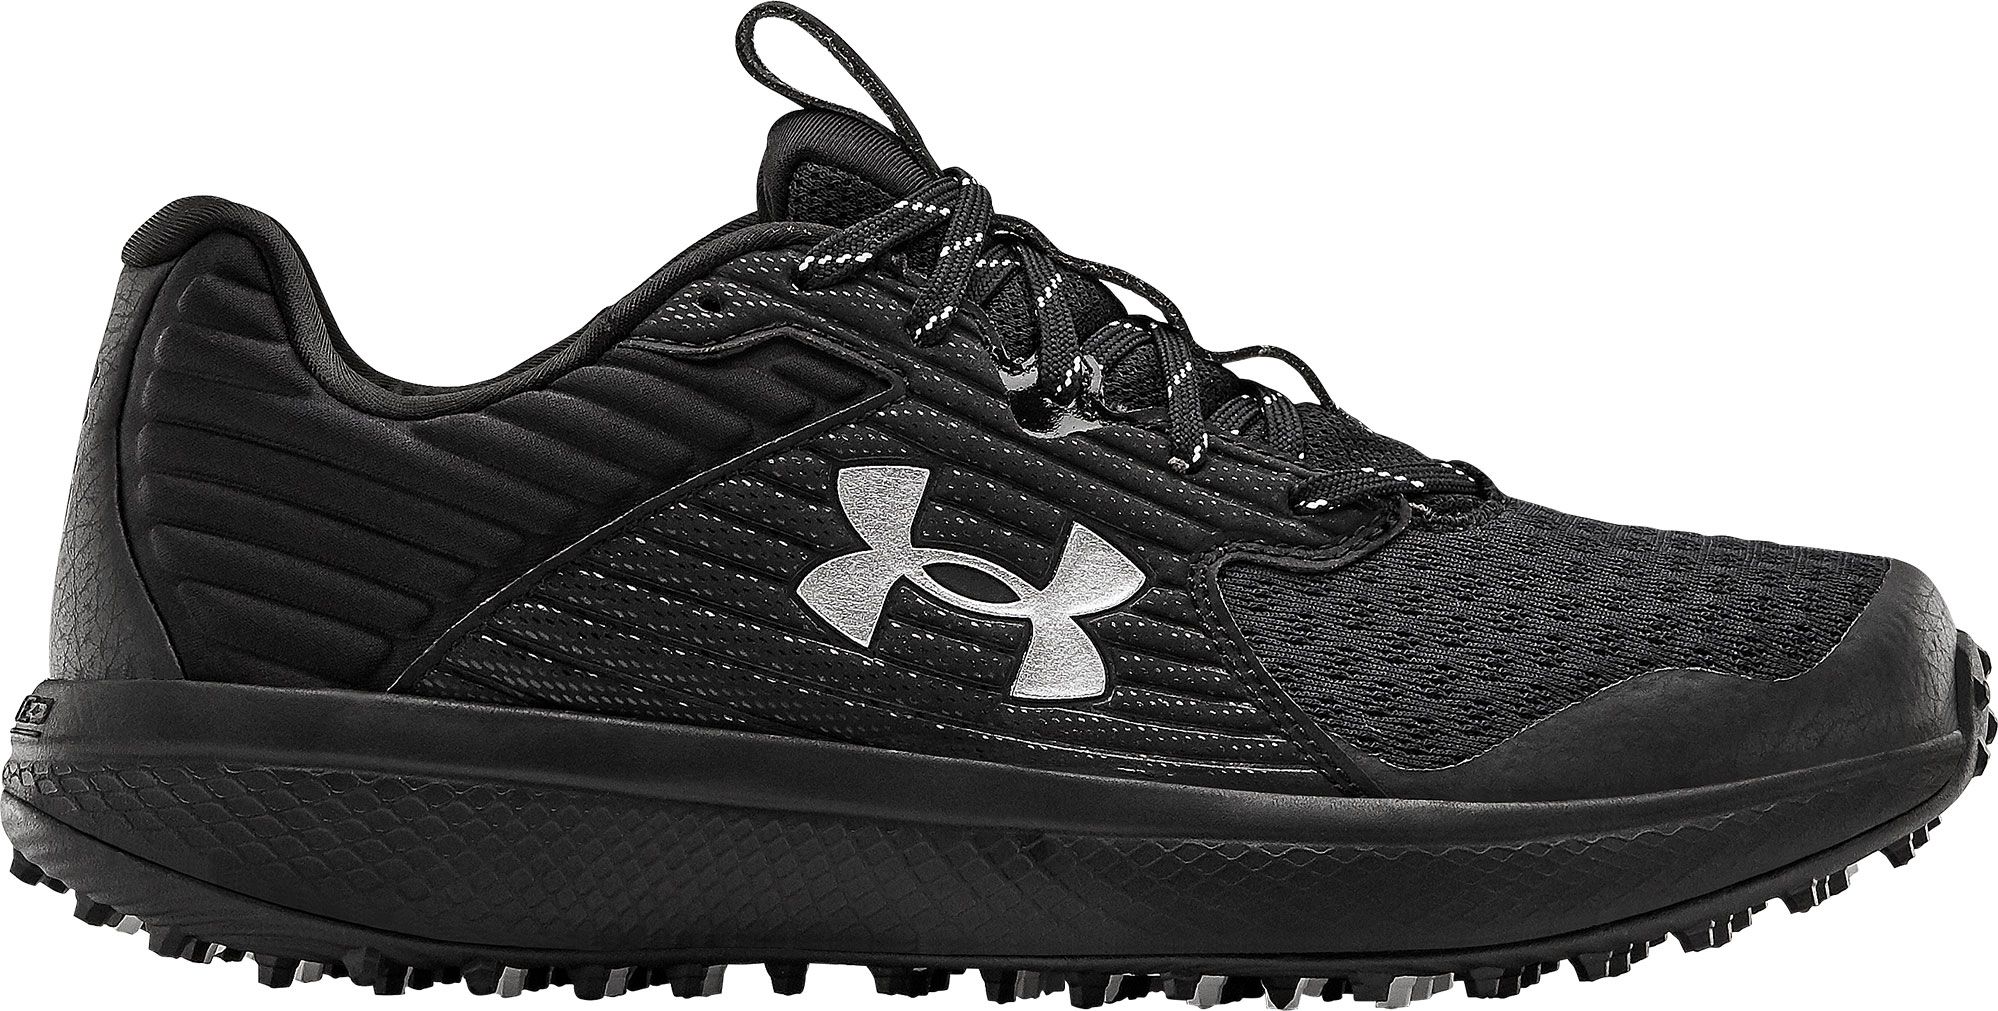 under armour turf shoes